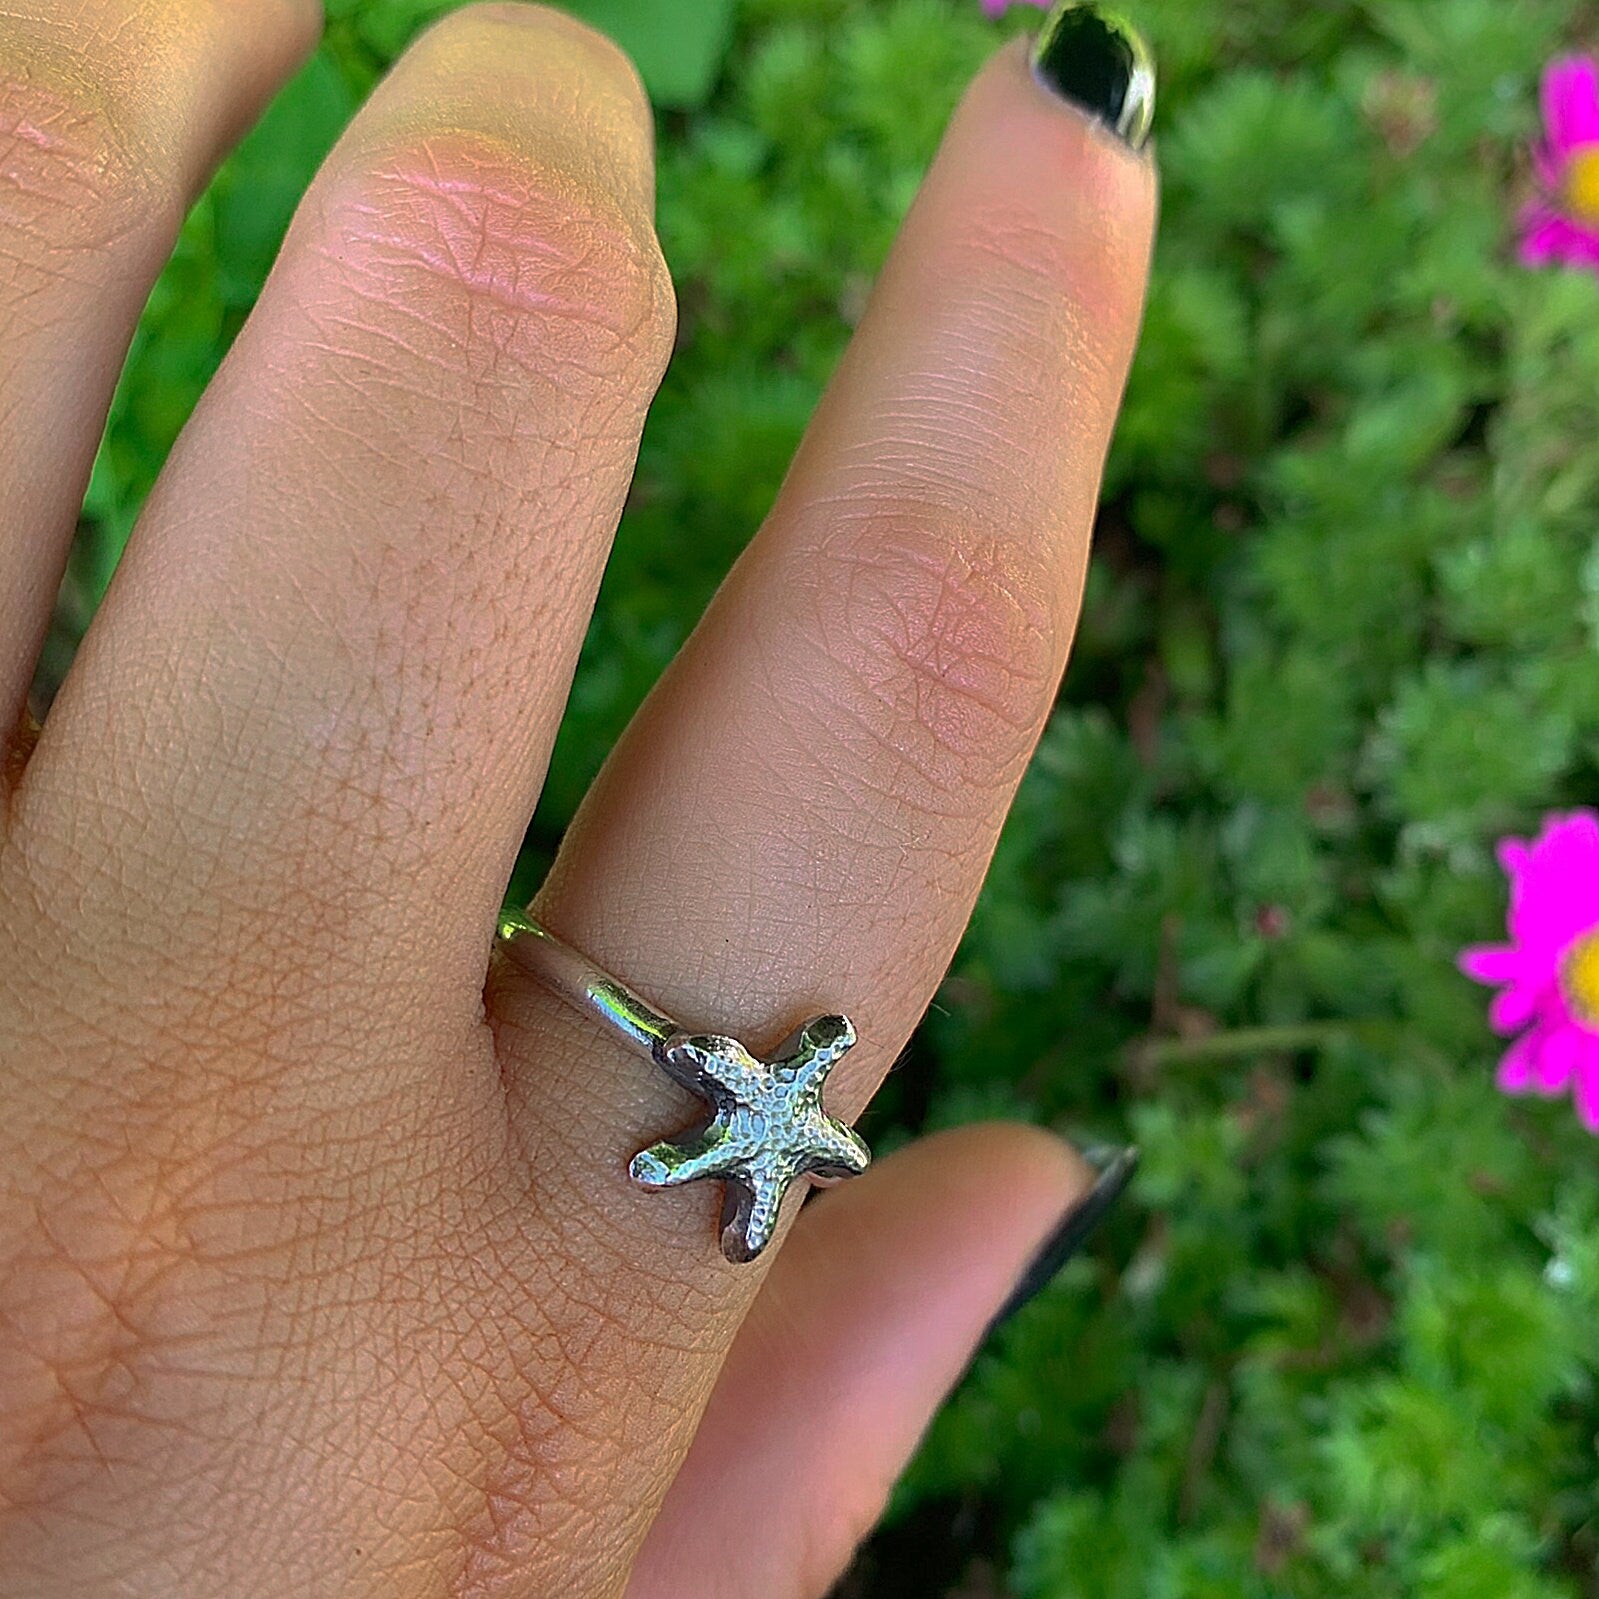 Starfish Ring - Sterling Silver - Made to Order - Silver Starfish Rings - Hammered Ocean Jewelry - Handmade Sea Star Fish Ring